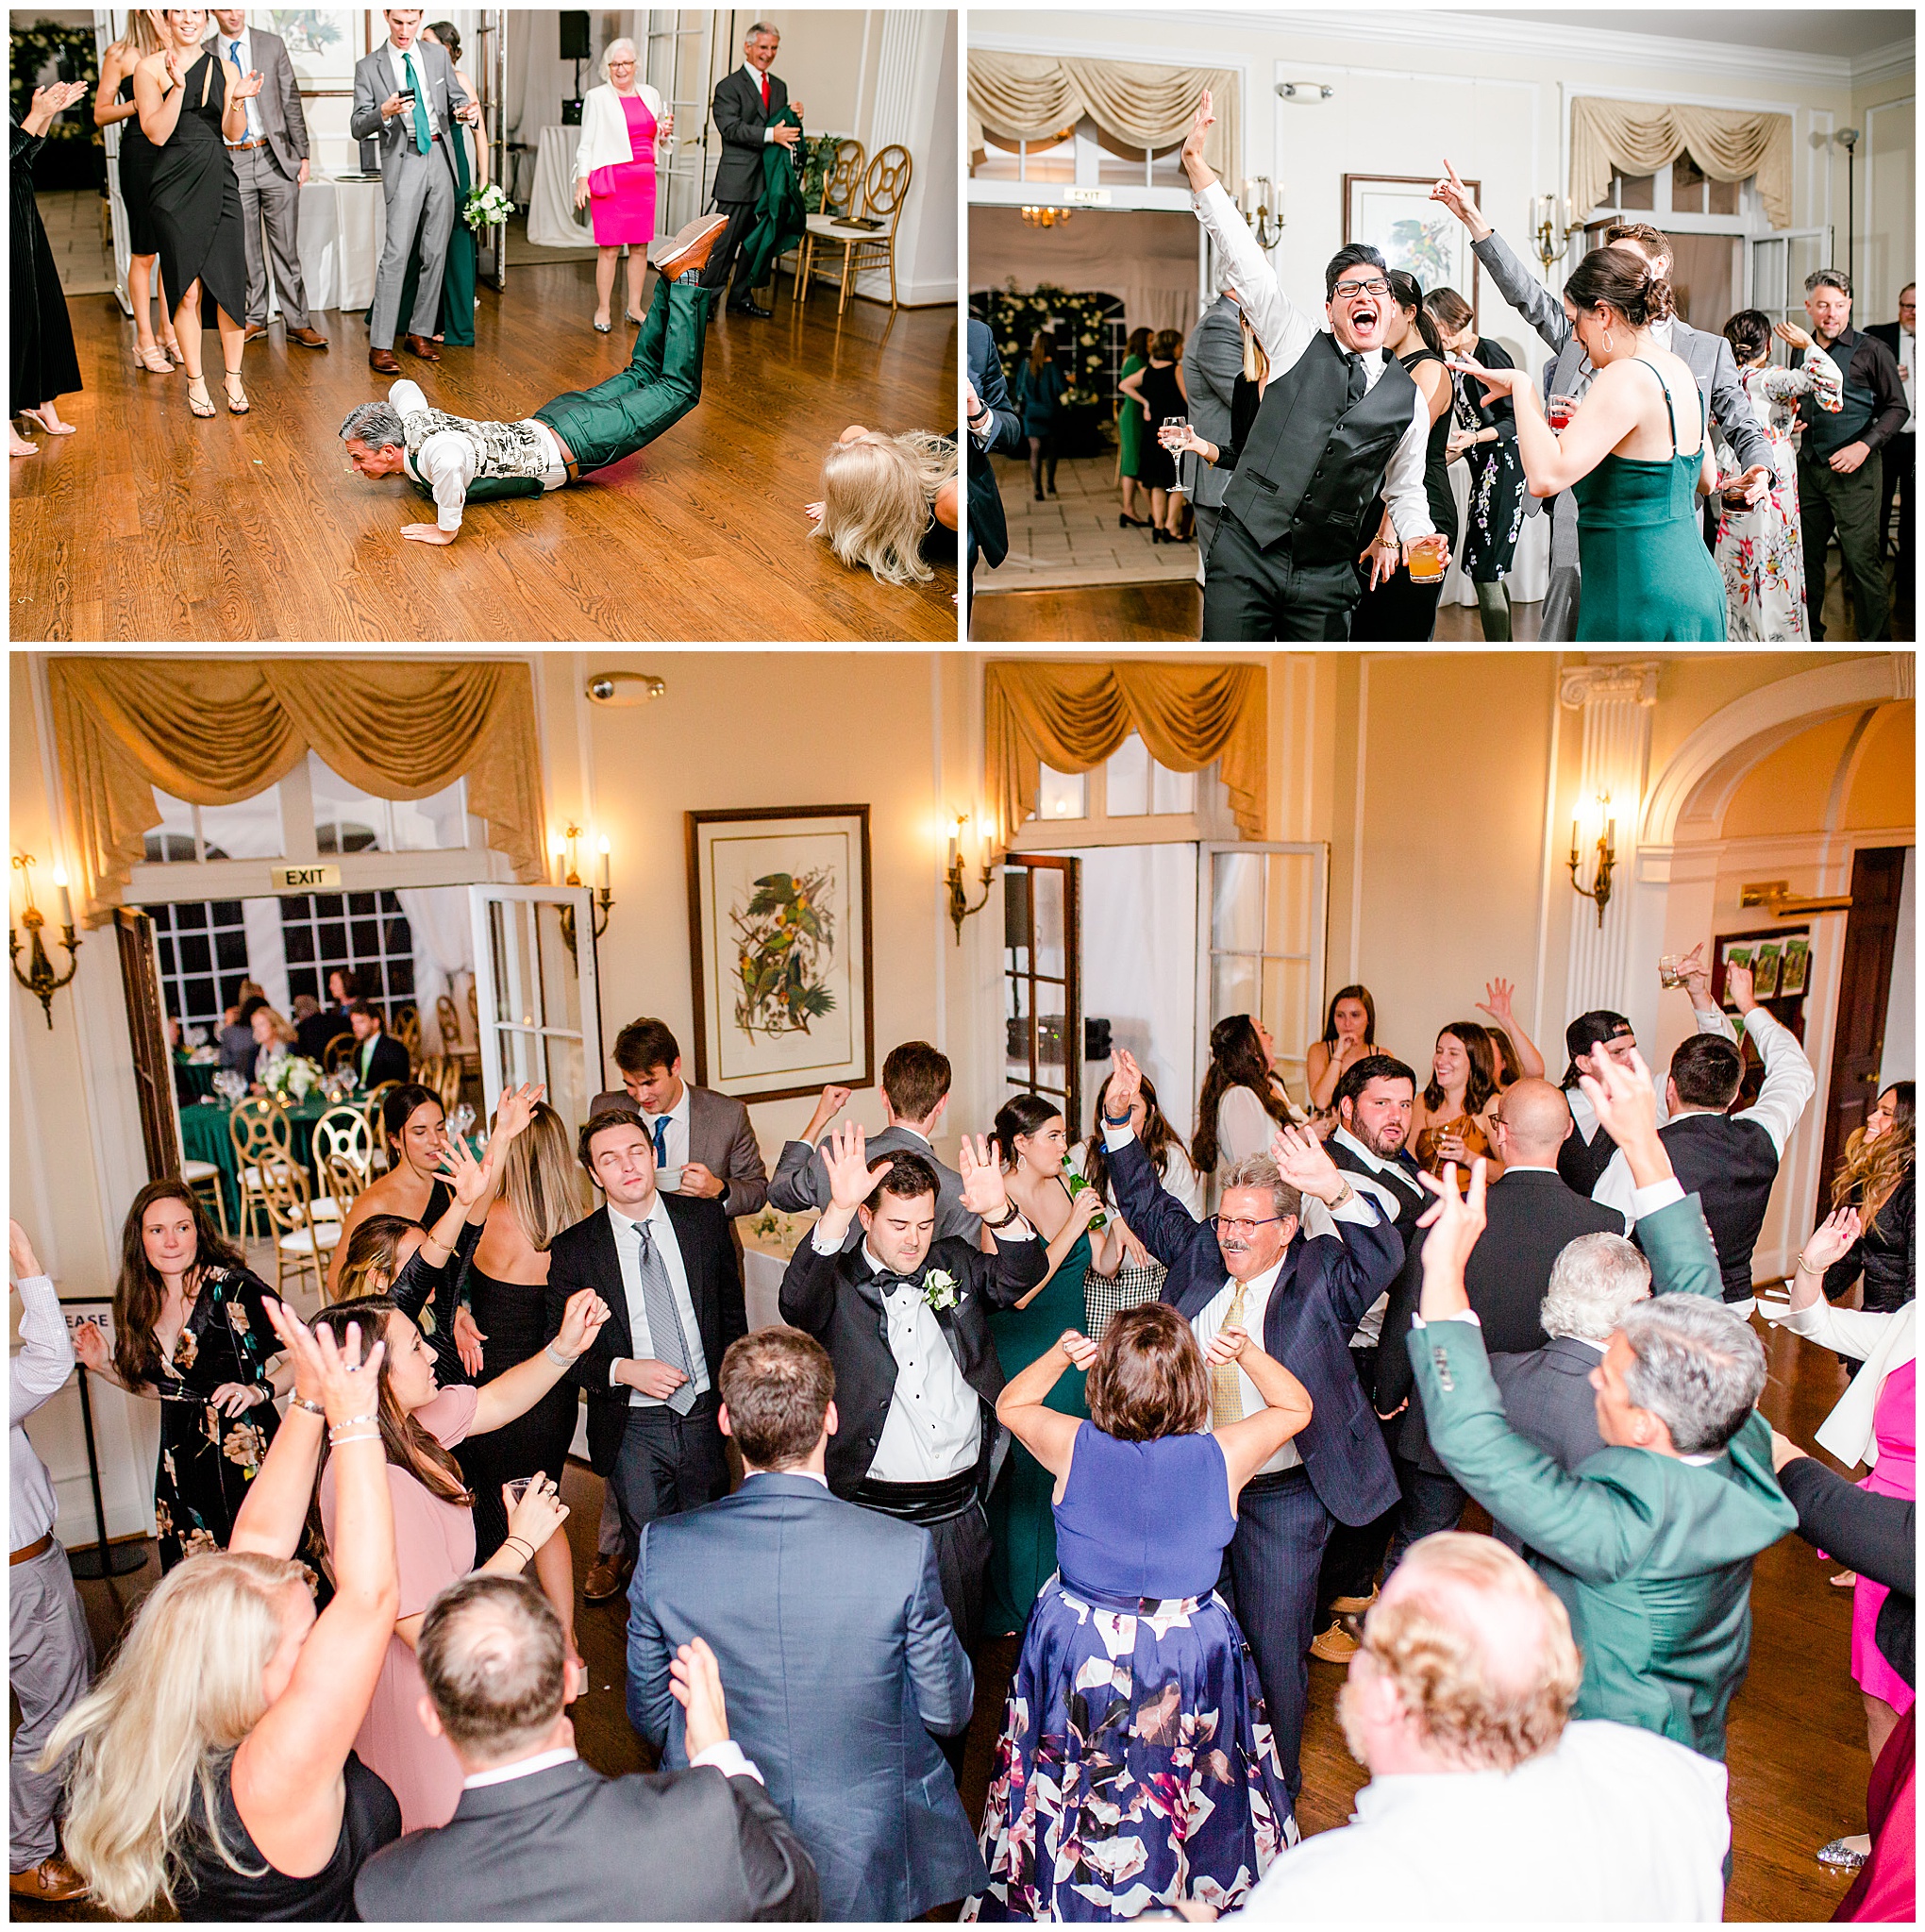 emerald and ivory Woodend Sanctuary wedding, autumn Woodend Sanctuary wedding, rainy day wedding, Maryland wedding venues, Chevy Chase MD wedding venue, mansion wedding, manor house wedding, indoor wedding, DC wedding venue, DC wedding photographer, Baltimore wedding photographer, Rachel E.H. Photography, emerald and ivory aesthetic, wedding reception, guests dancing, man doing the worm, The Coordinated Collective